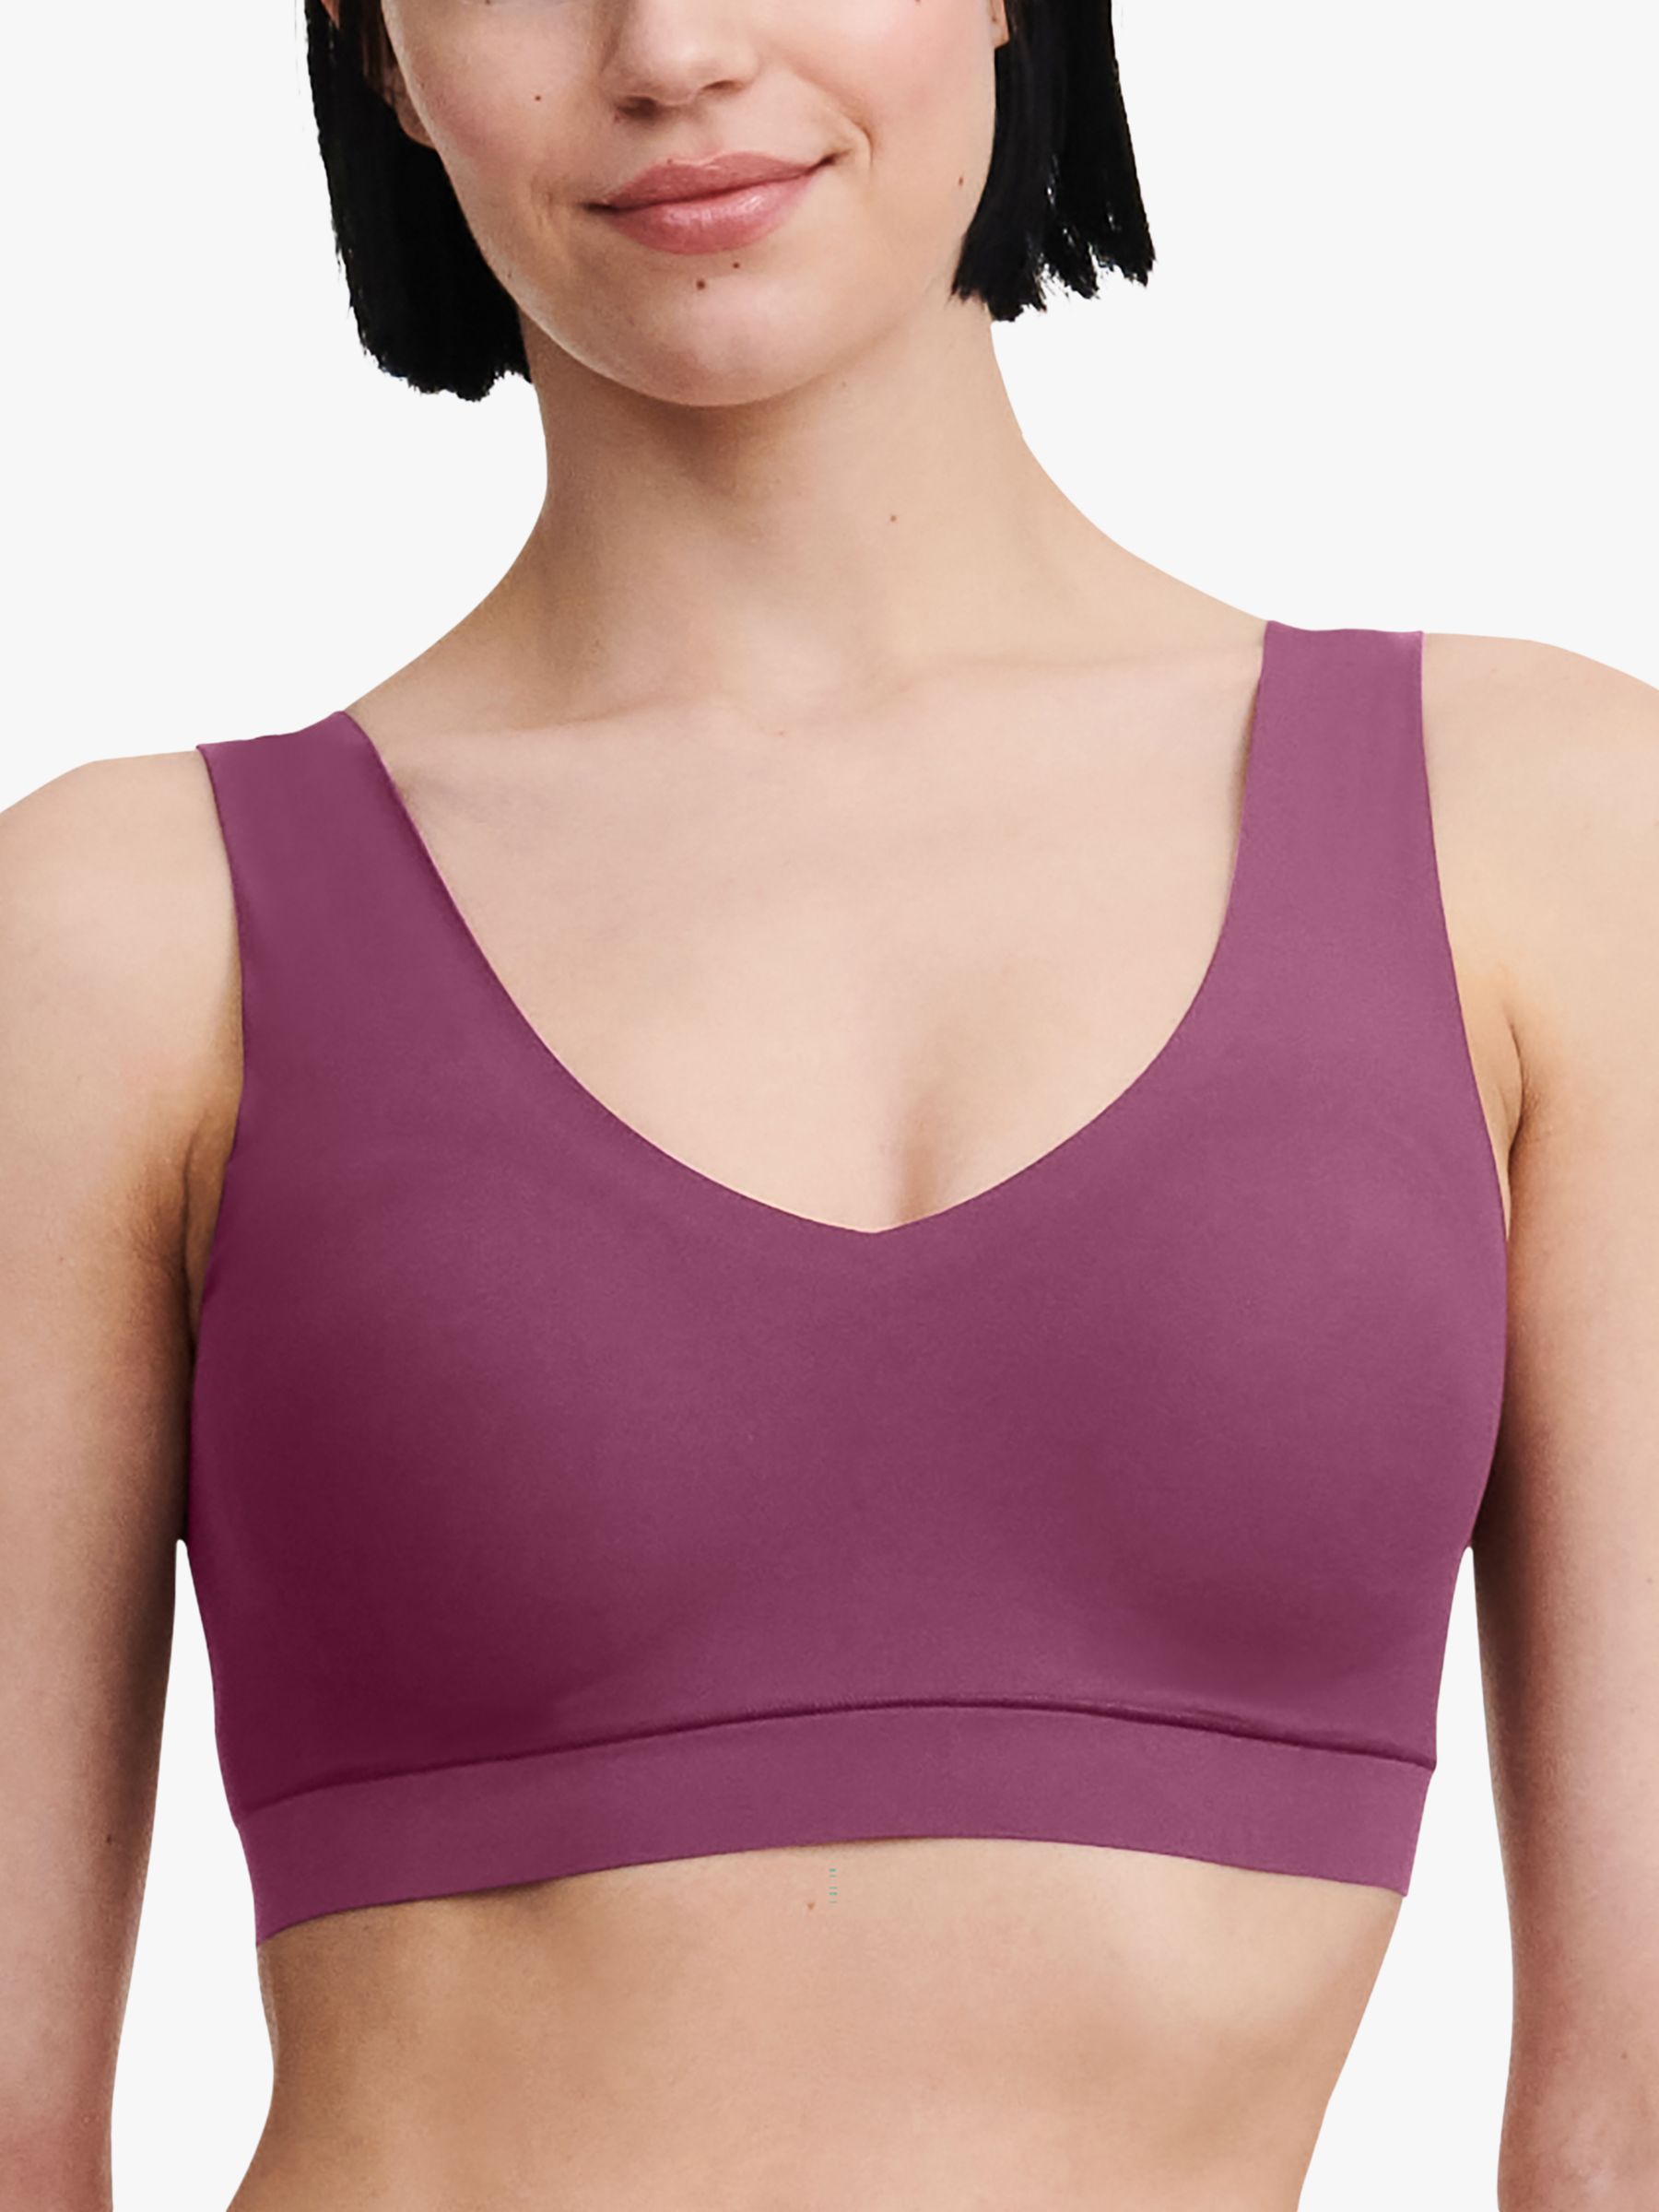 Reebok Lux Medium - Impact Strappy Sports Bra powder pink, Outlet Training  things for him \ Sports bras